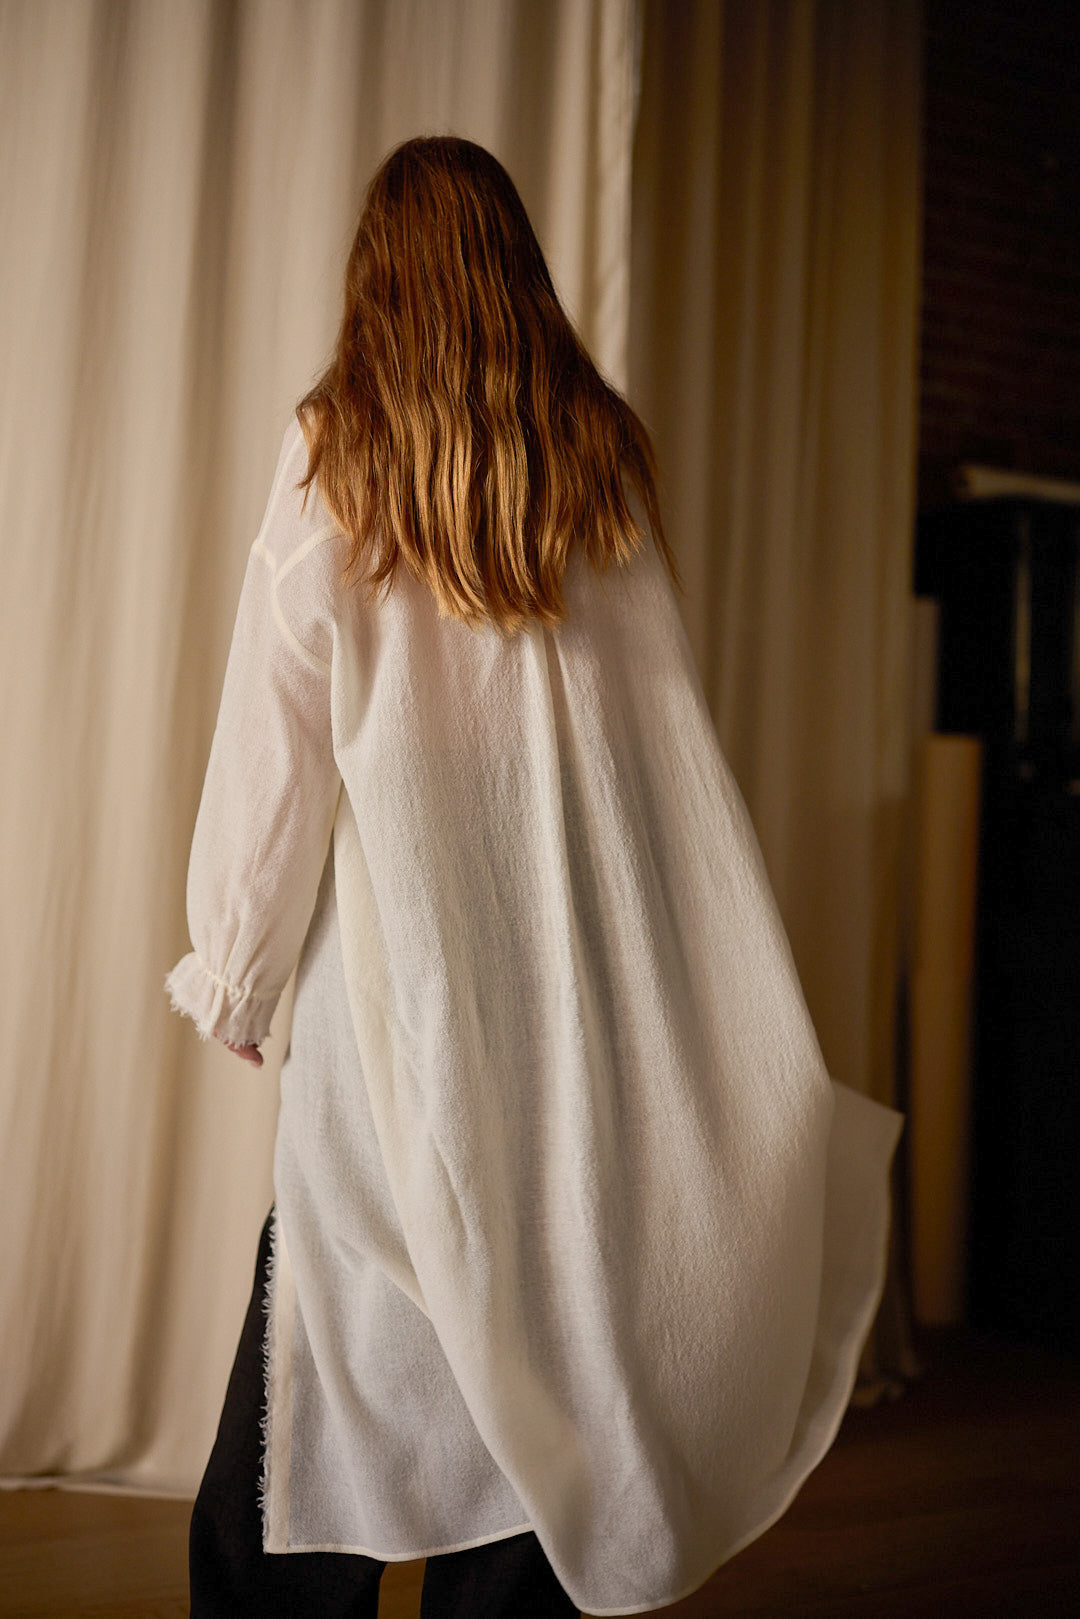 A person with long, reddish-brown hair stands with their back to the camera, wearing a loose, white Dress Coat | Japanese Wool Gauze Undyed. The background is softly lit with neutral-colored curtains and some dark furniture partially visible, evoking a sense of sustainable design.